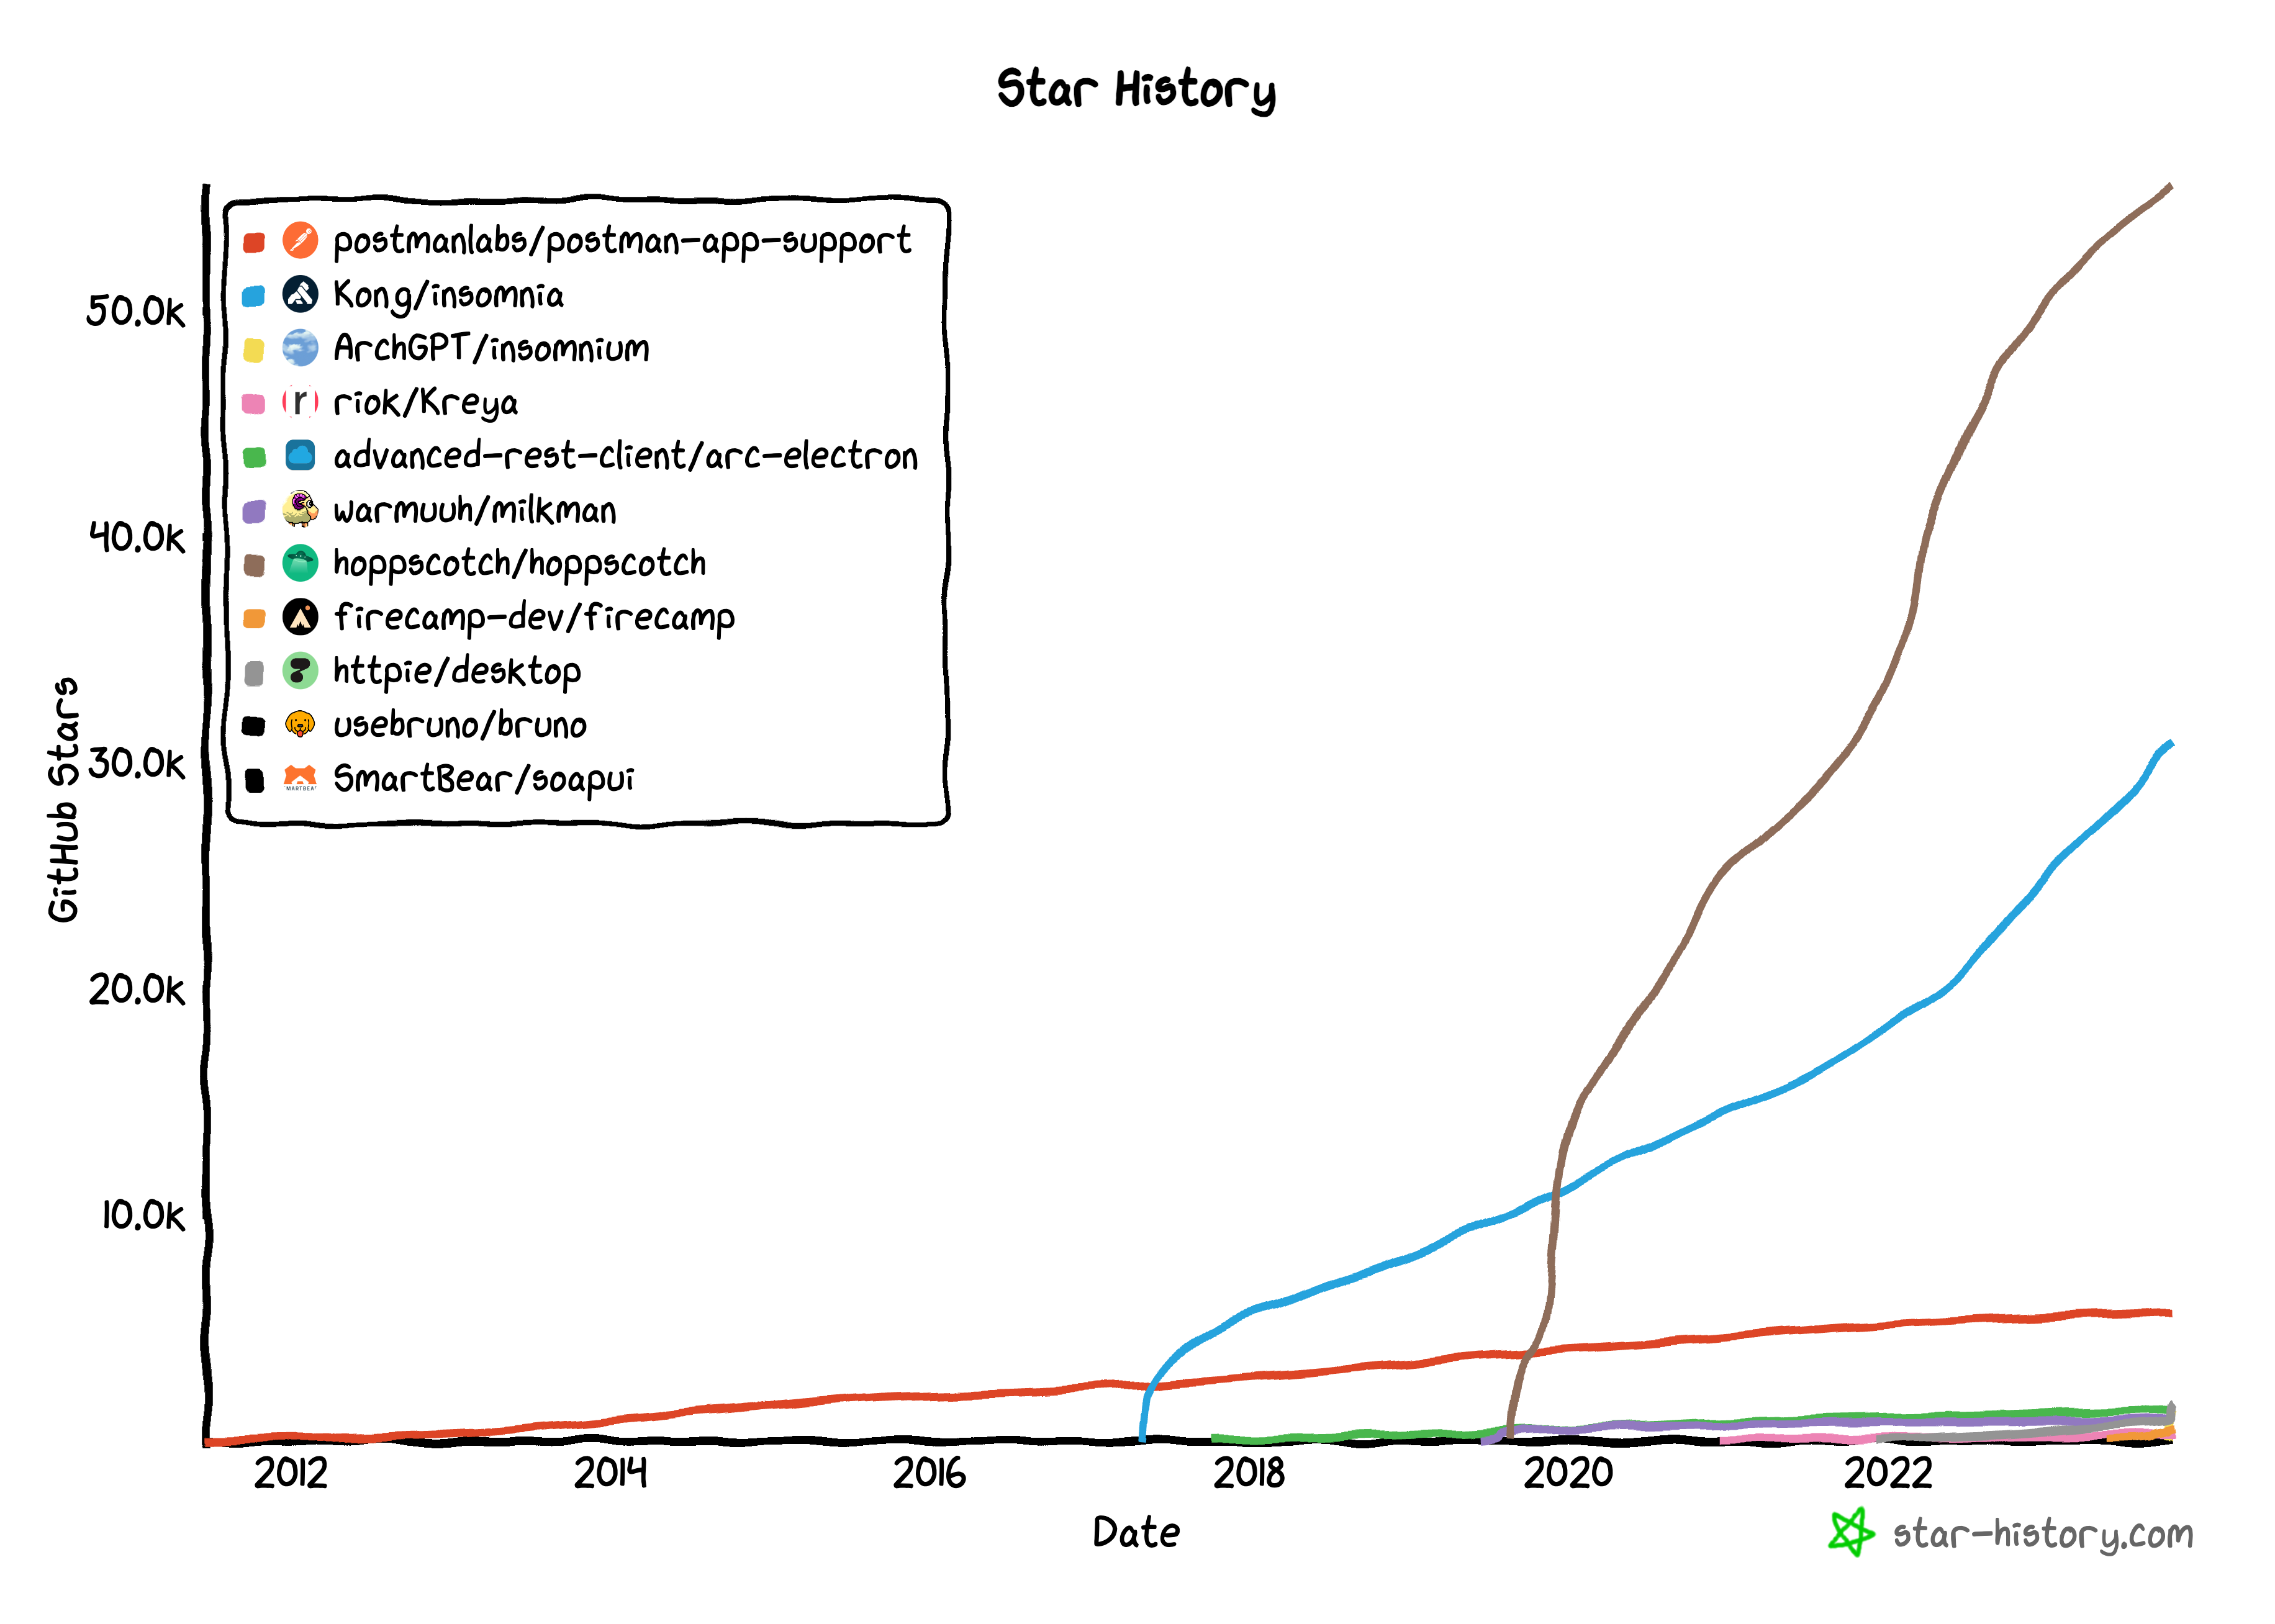 GitHub star history for all projects compared